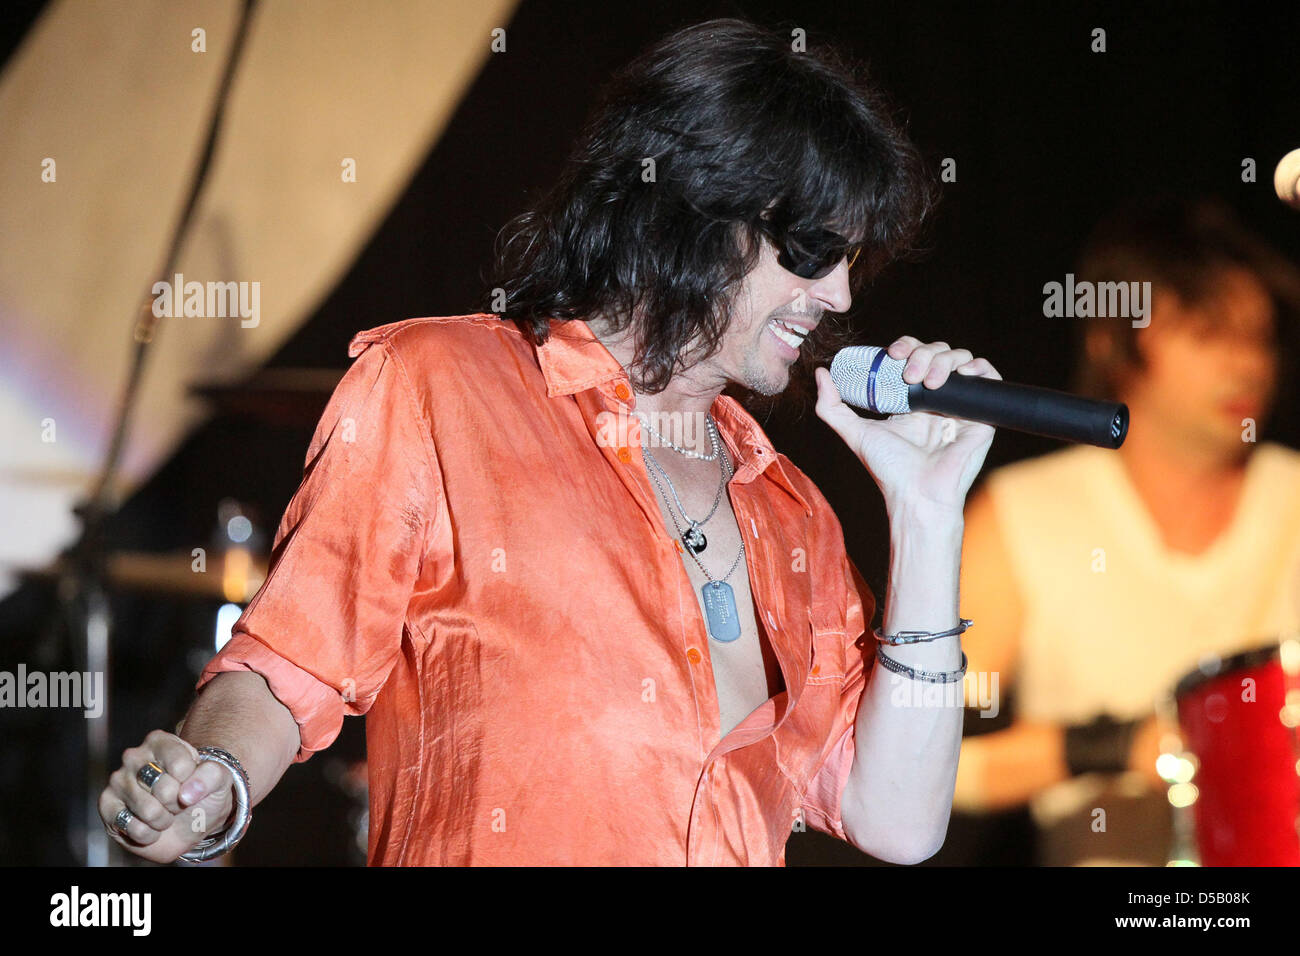 A handout picture taken on 28 July shows Kelly Hansen, singer of the band Foreigner, at their 'Can't Slow Down Tour 2010' in Bochum, Germany, July 28, 2010. Photo: Revierfoto Stock Photo